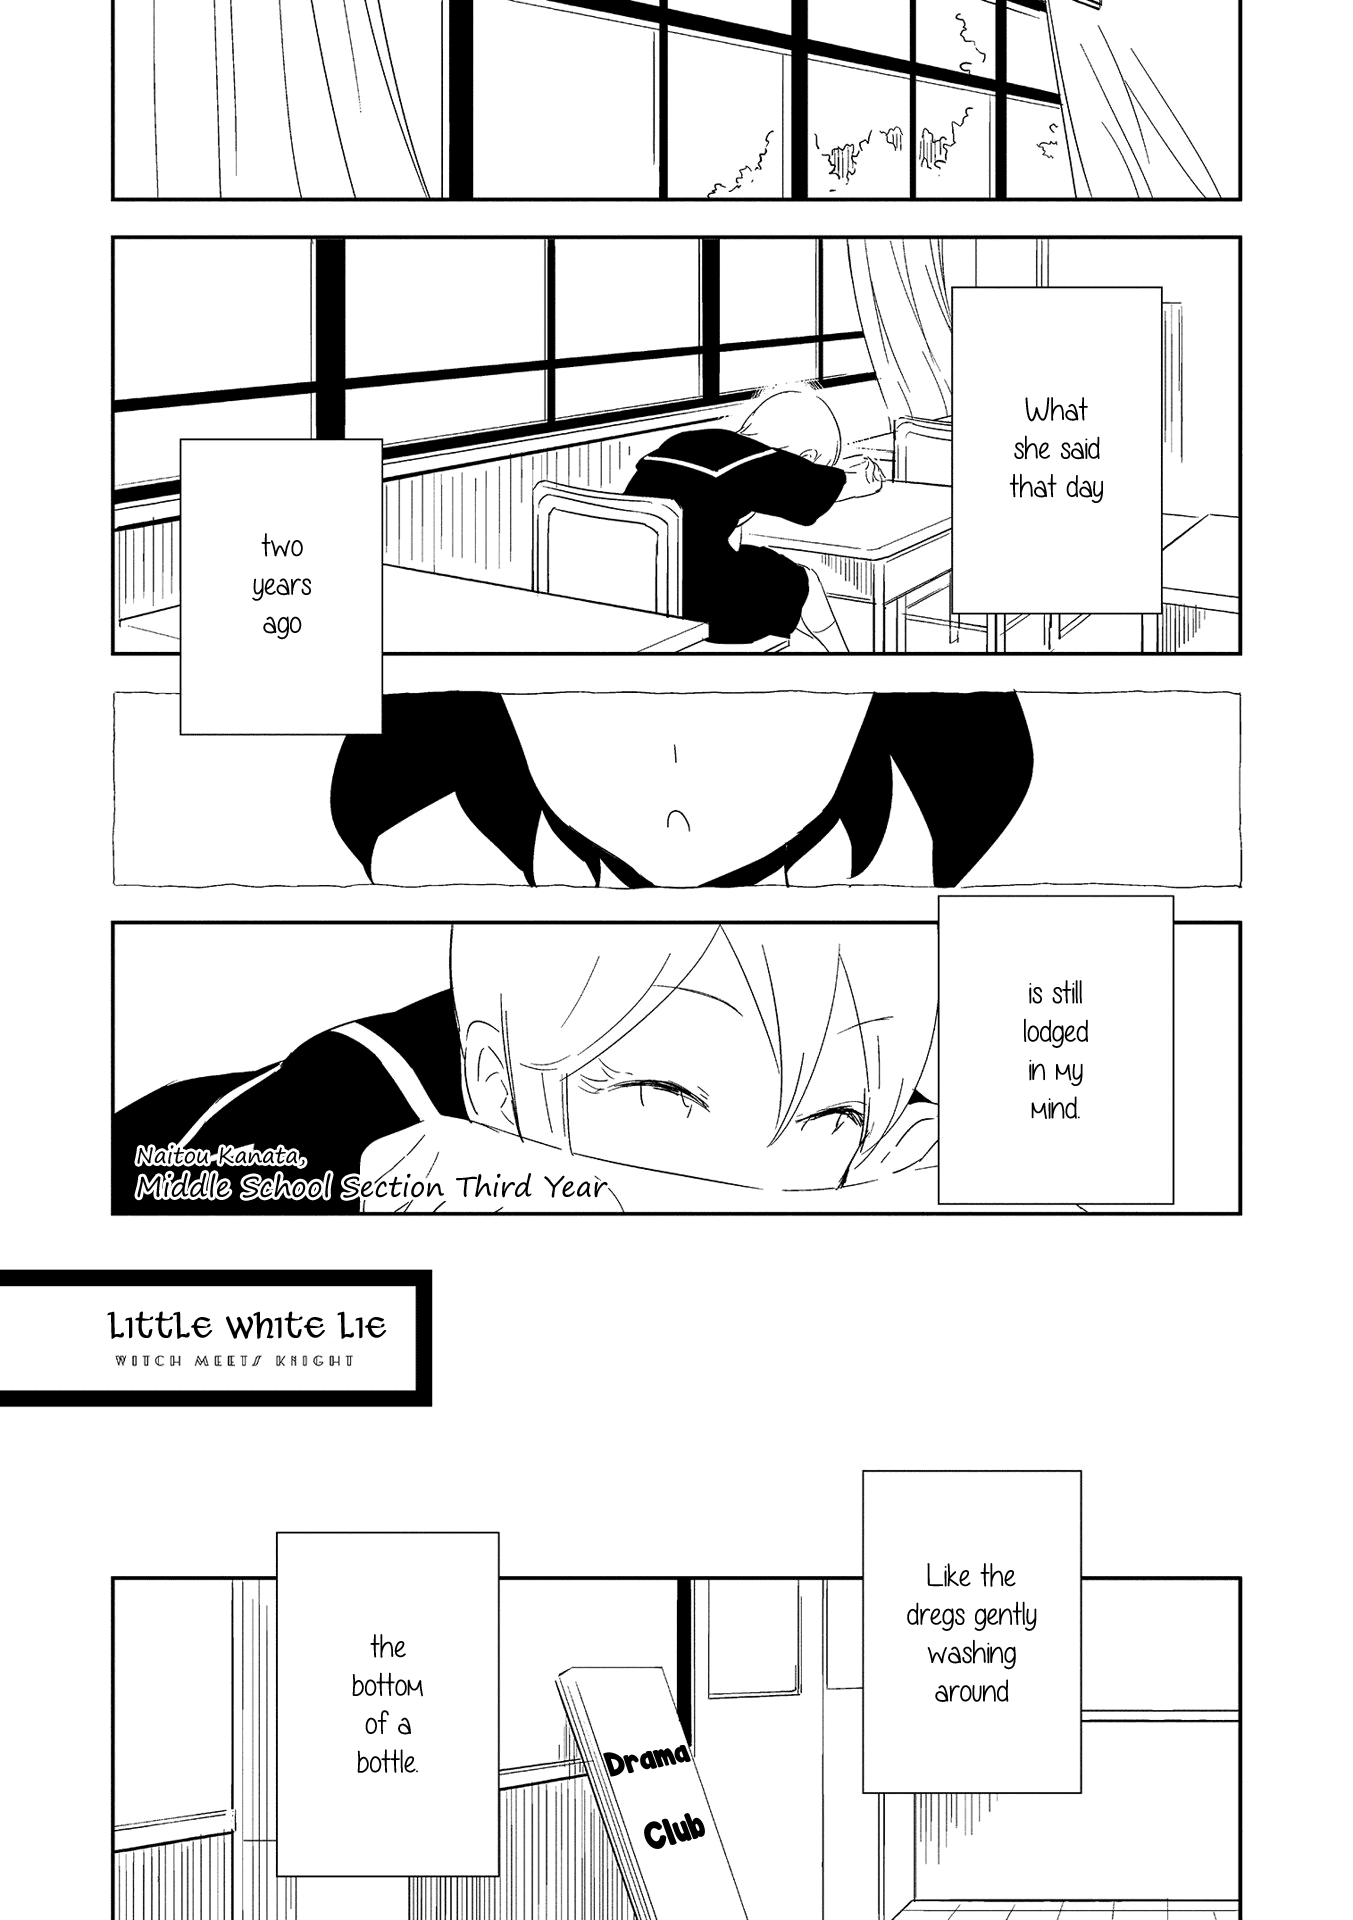 Witch Meets Knight - Page 1